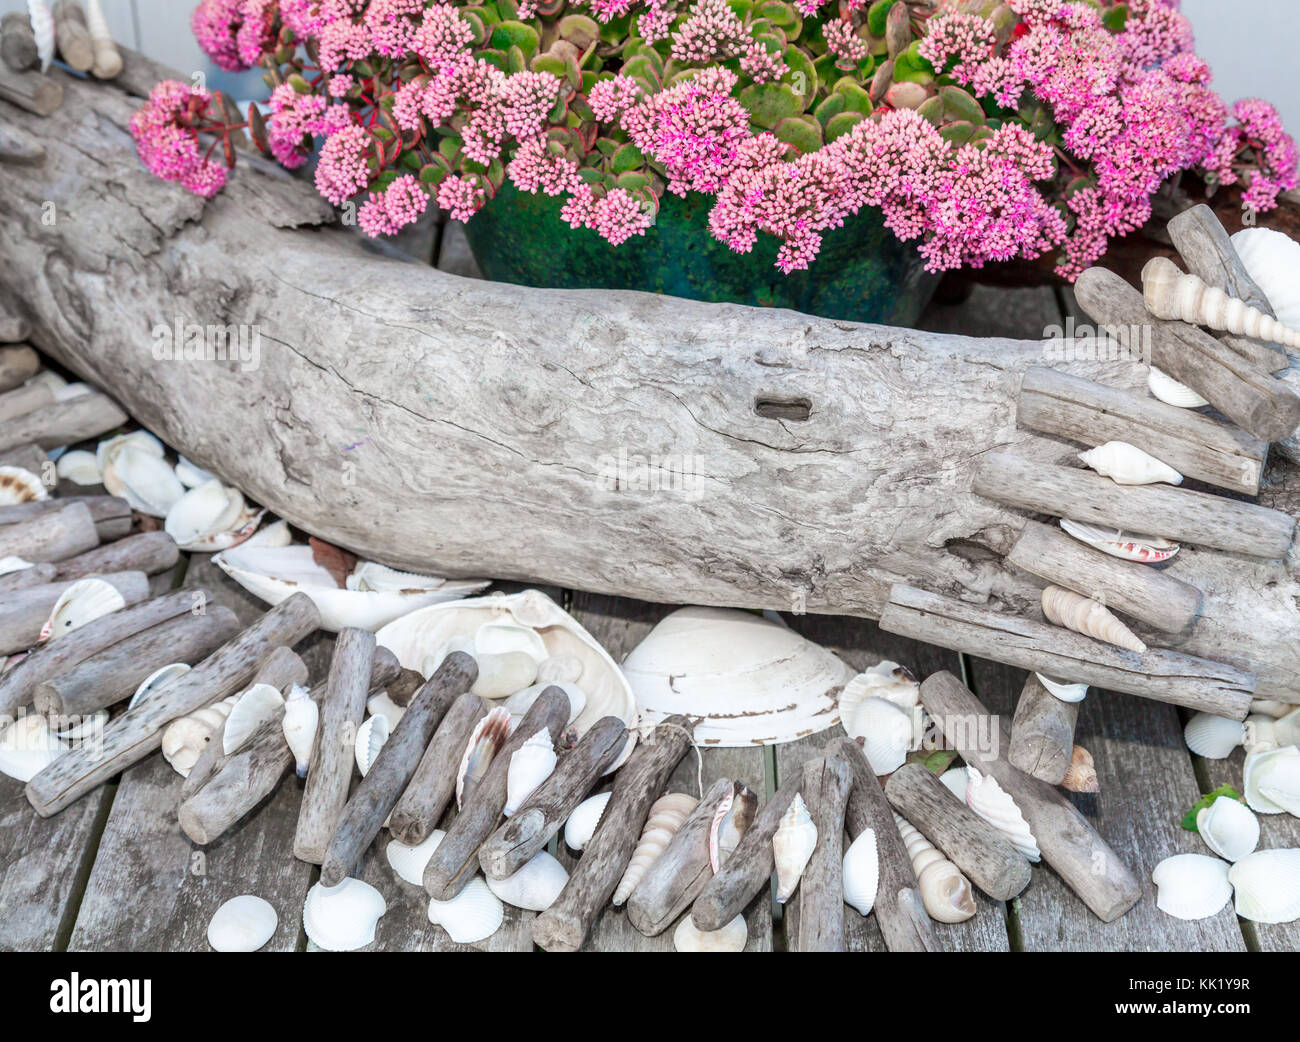 pink flowers with arranged found objects such as wood and shells Stock Photo